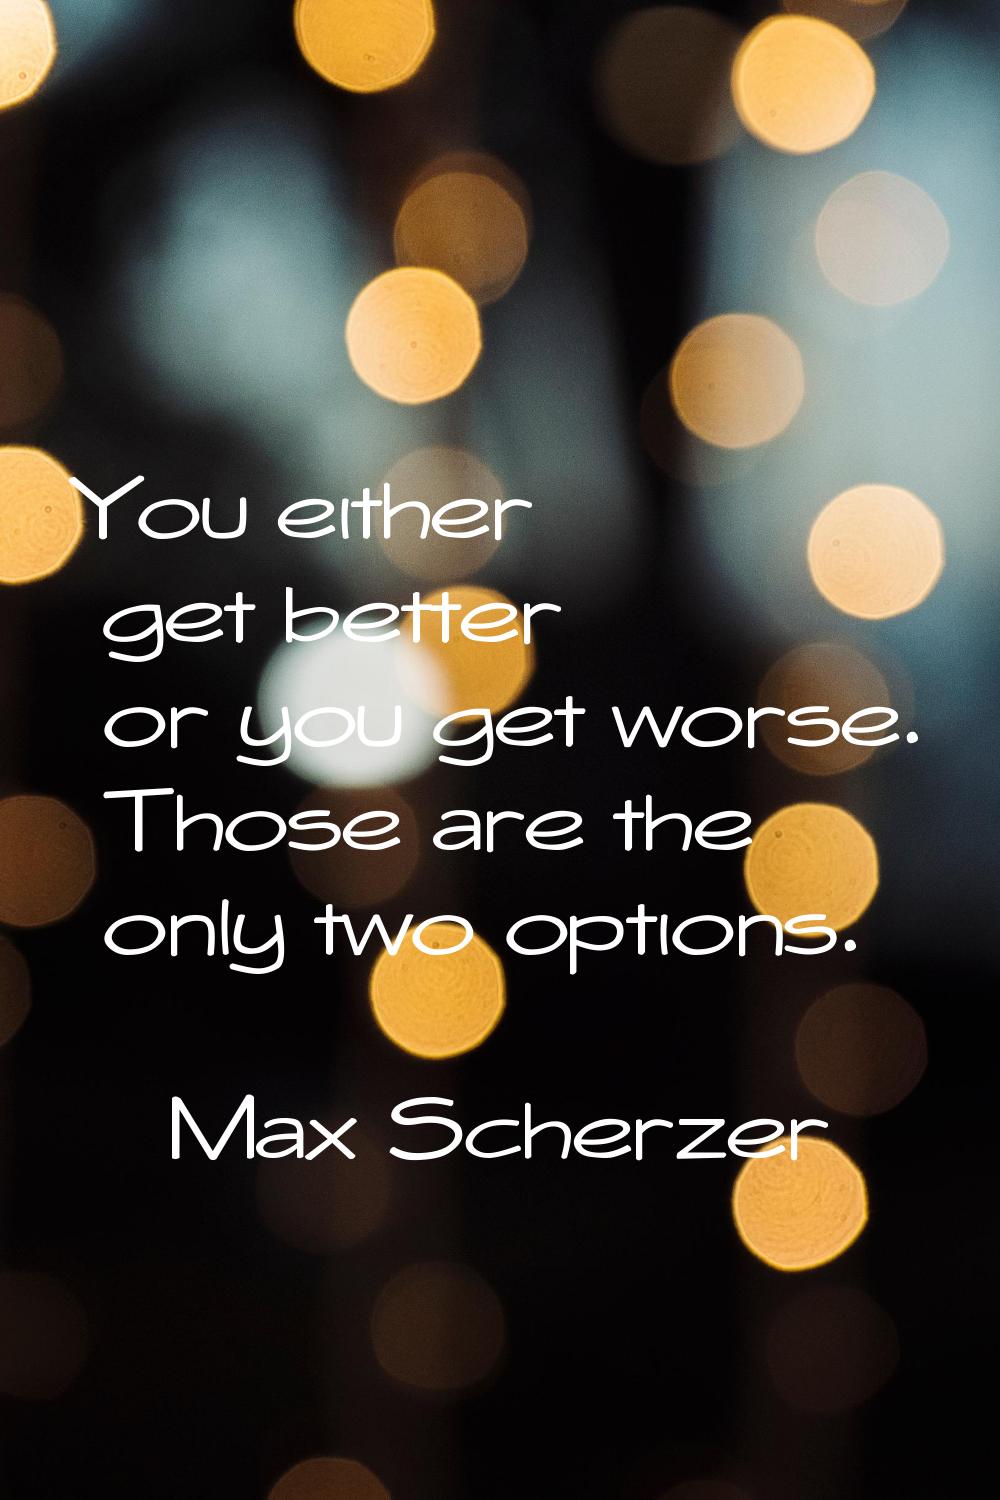 You either get better or you get worse. Those are the only two options.